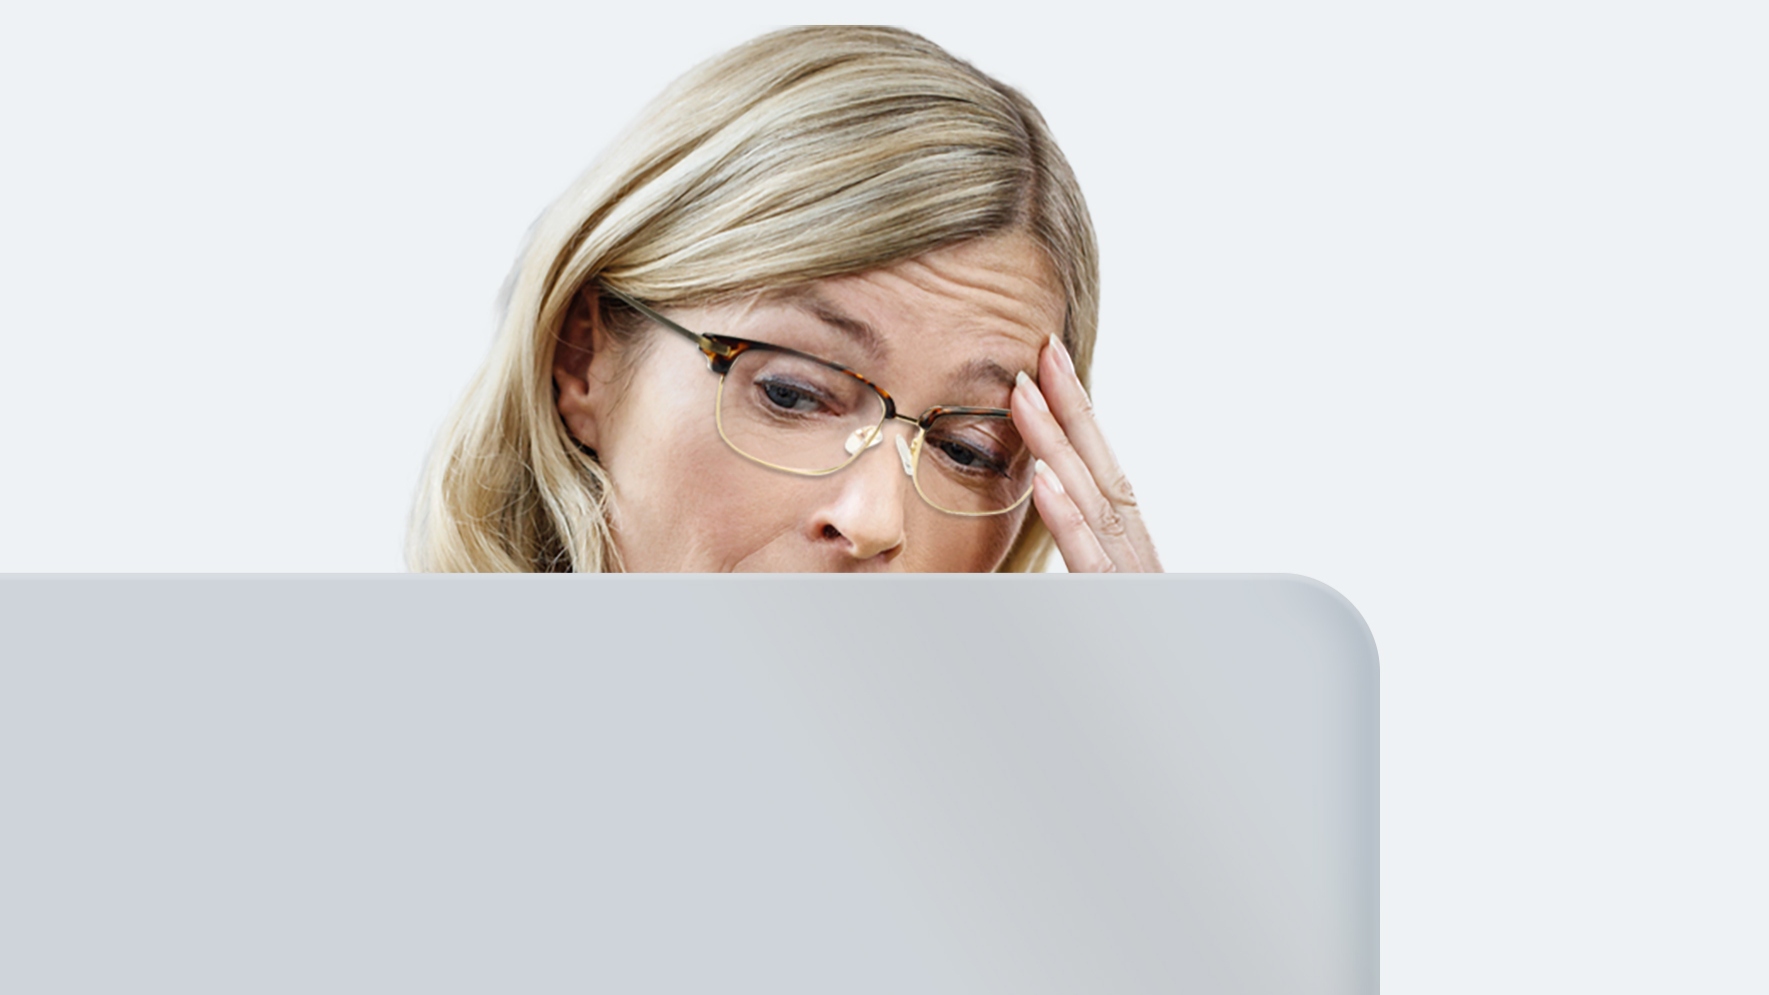 A middle-aged woman with long blonde hair wearing distance glasses is experiencing eye strain because her lenses are not made for staring at a screen all day.